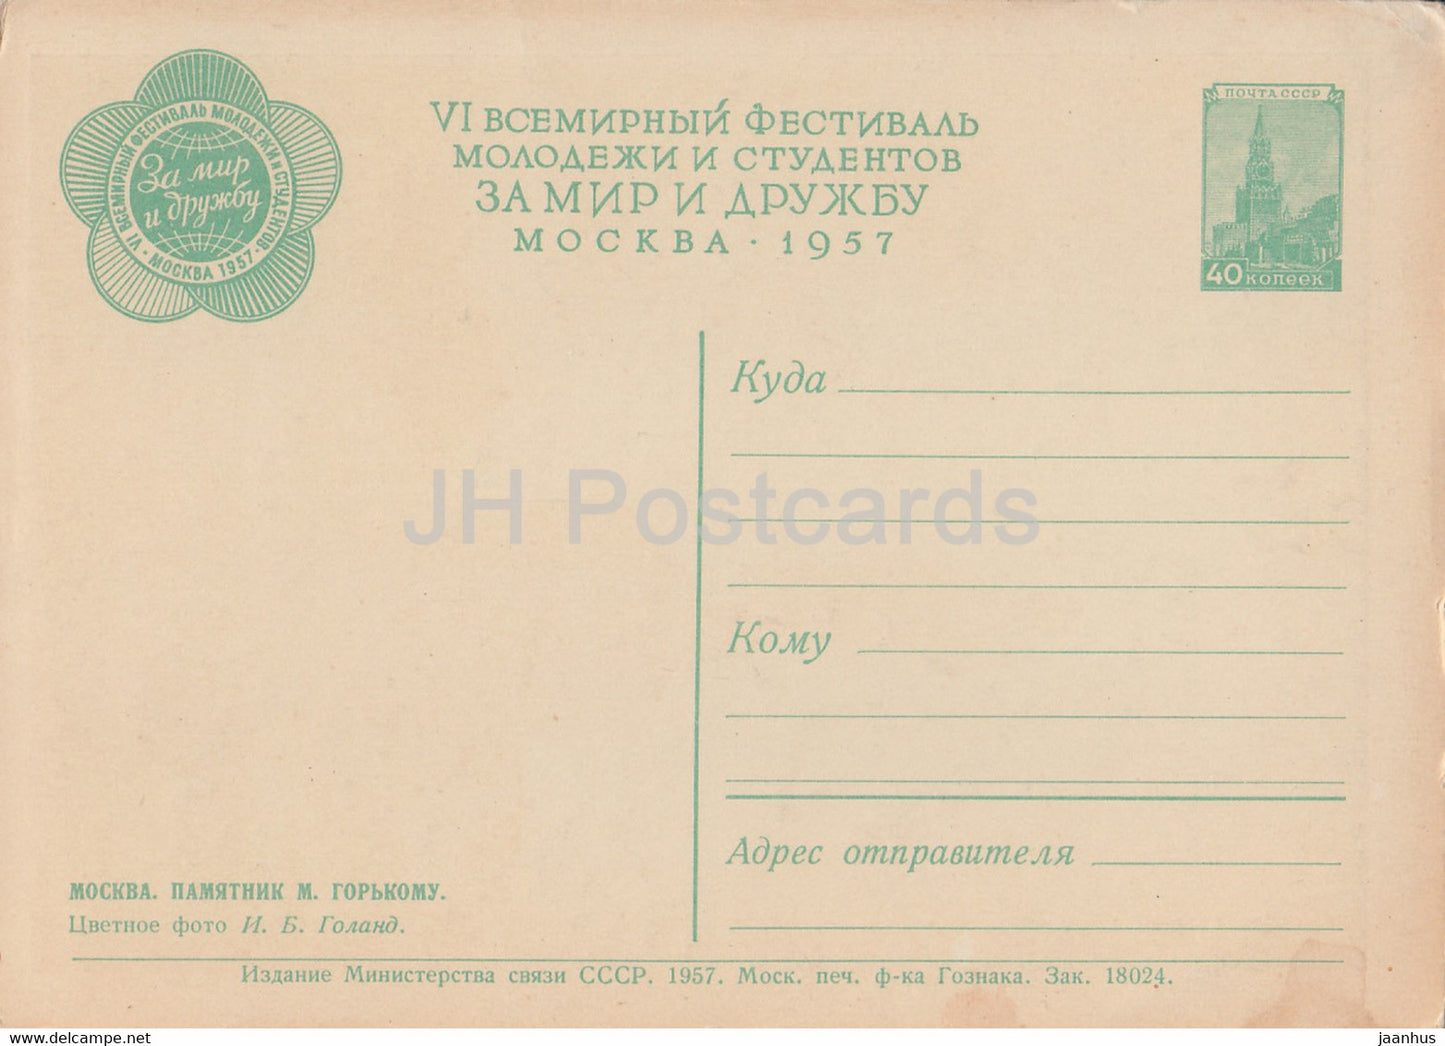 Moscow - monument to Gorky - postal stationery - 1957 - Russia USSR - unused